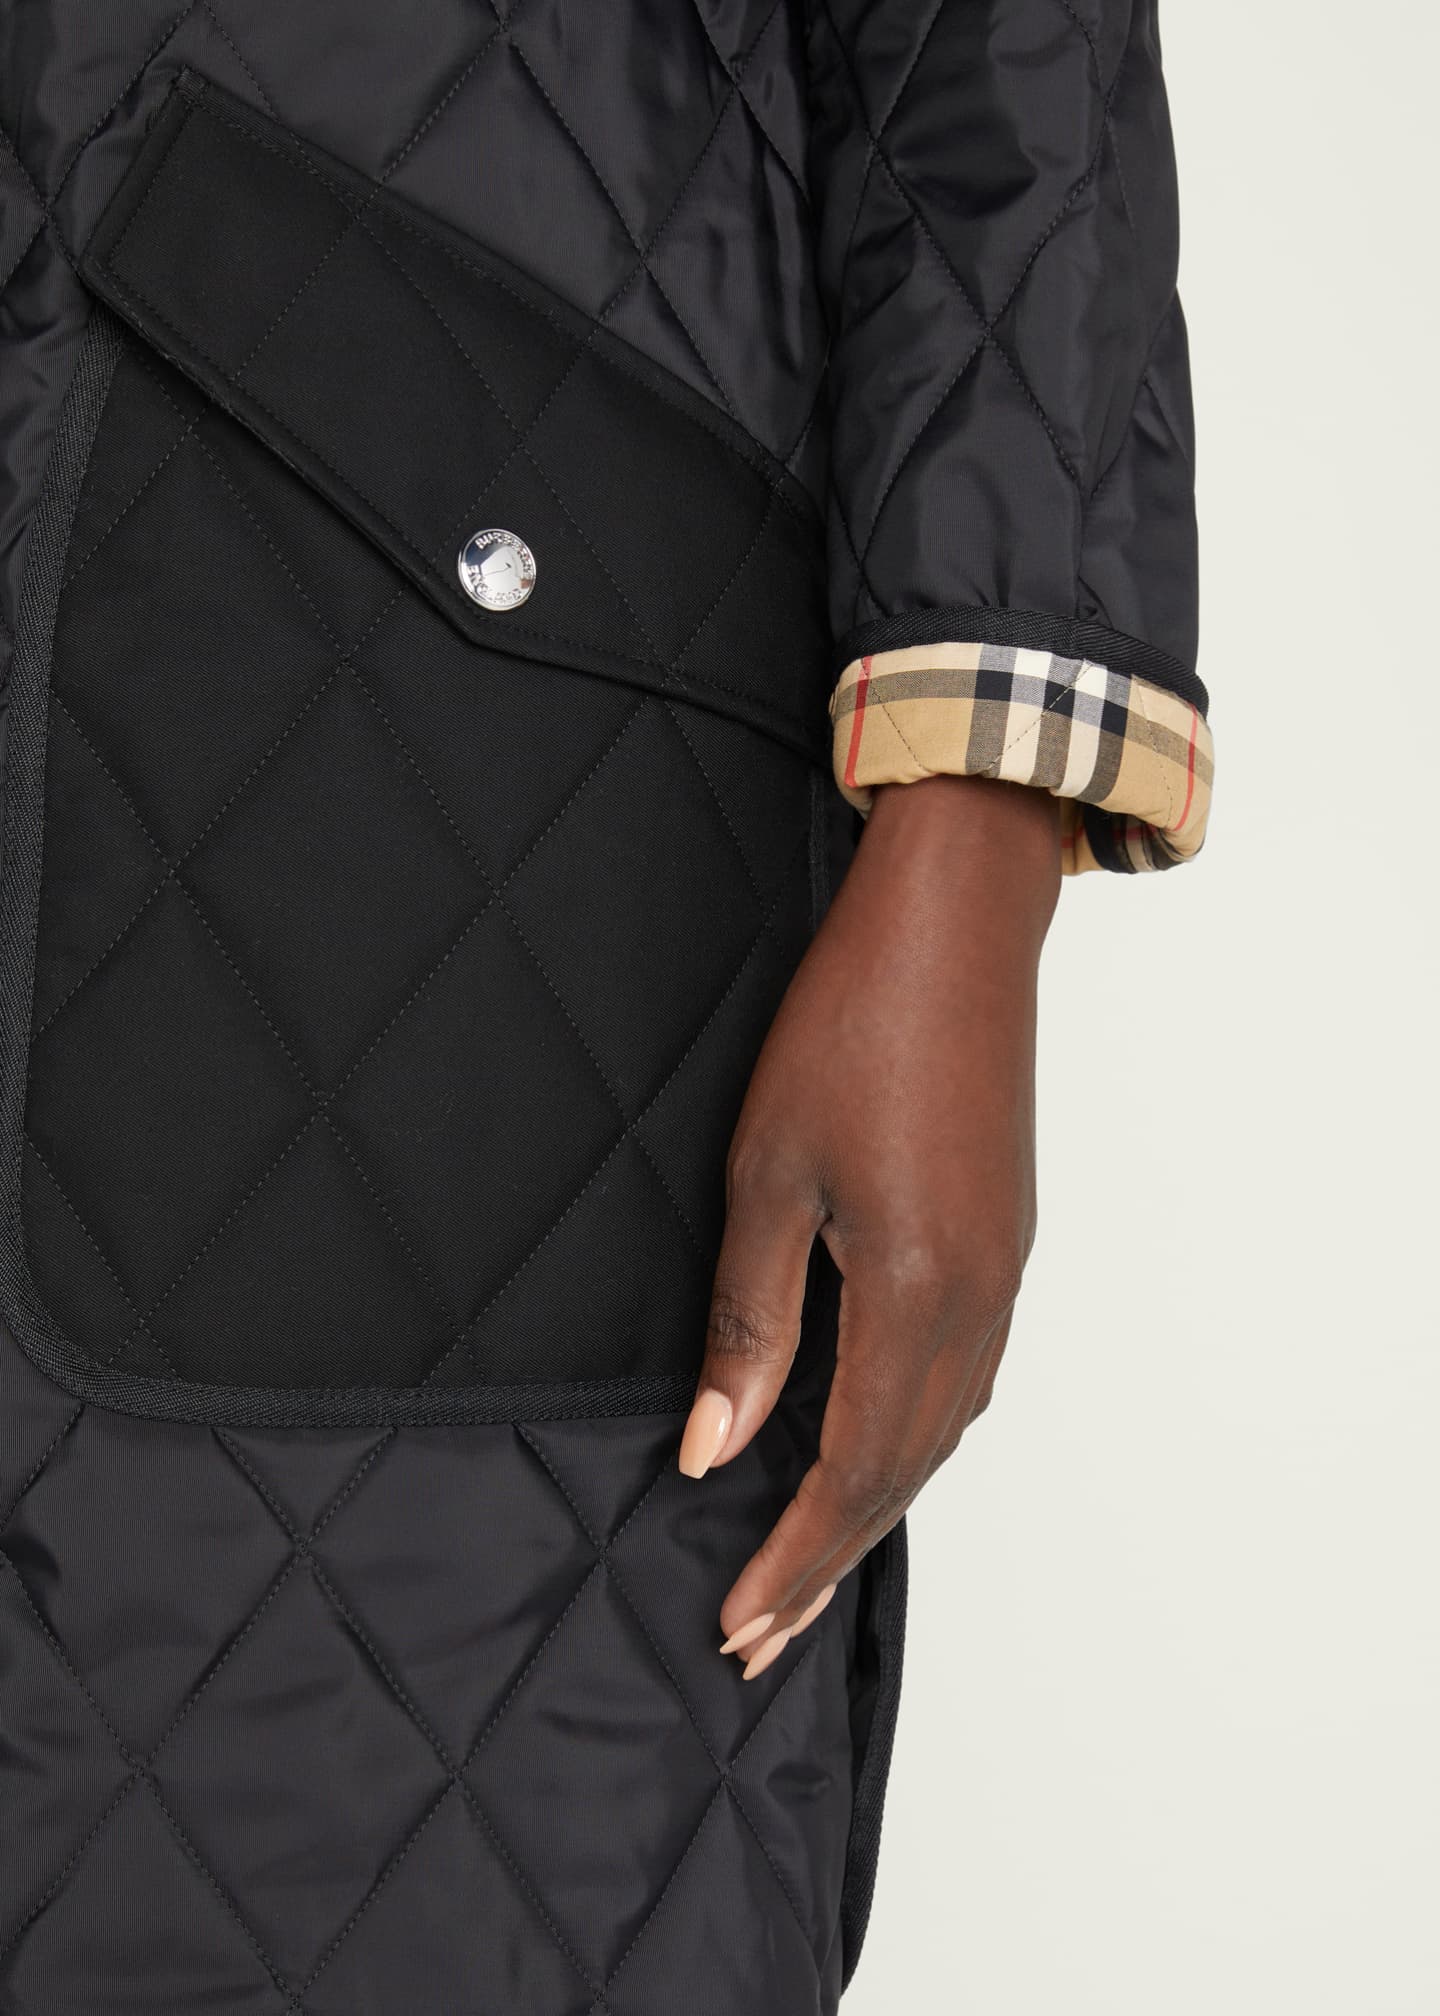 Burberry Roxby Quilted Thermoregulated Coat - Bergdorf Goodman